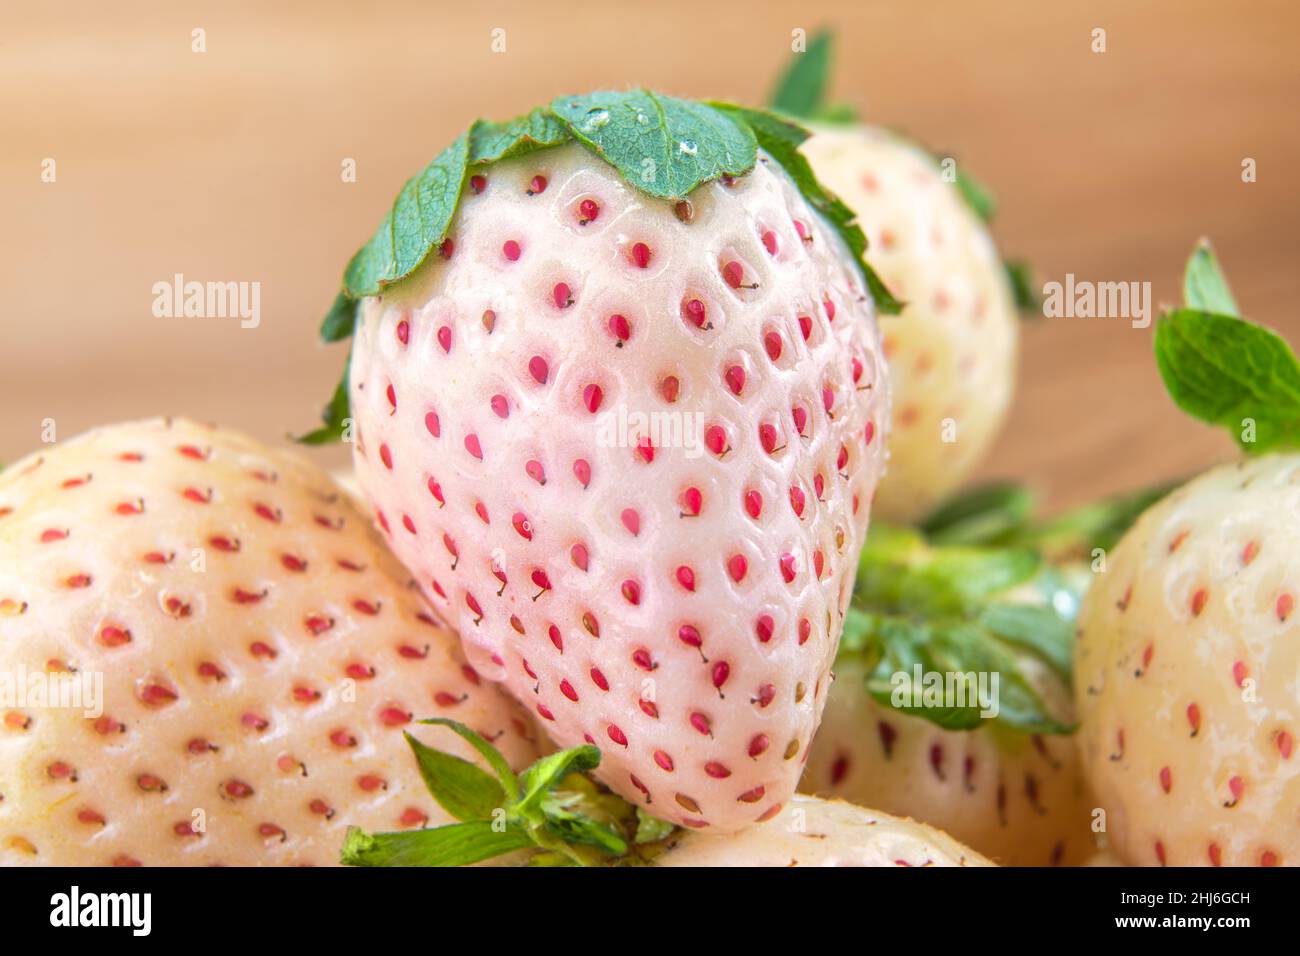 Close-up of pine berries with a wooden background Stock Photo